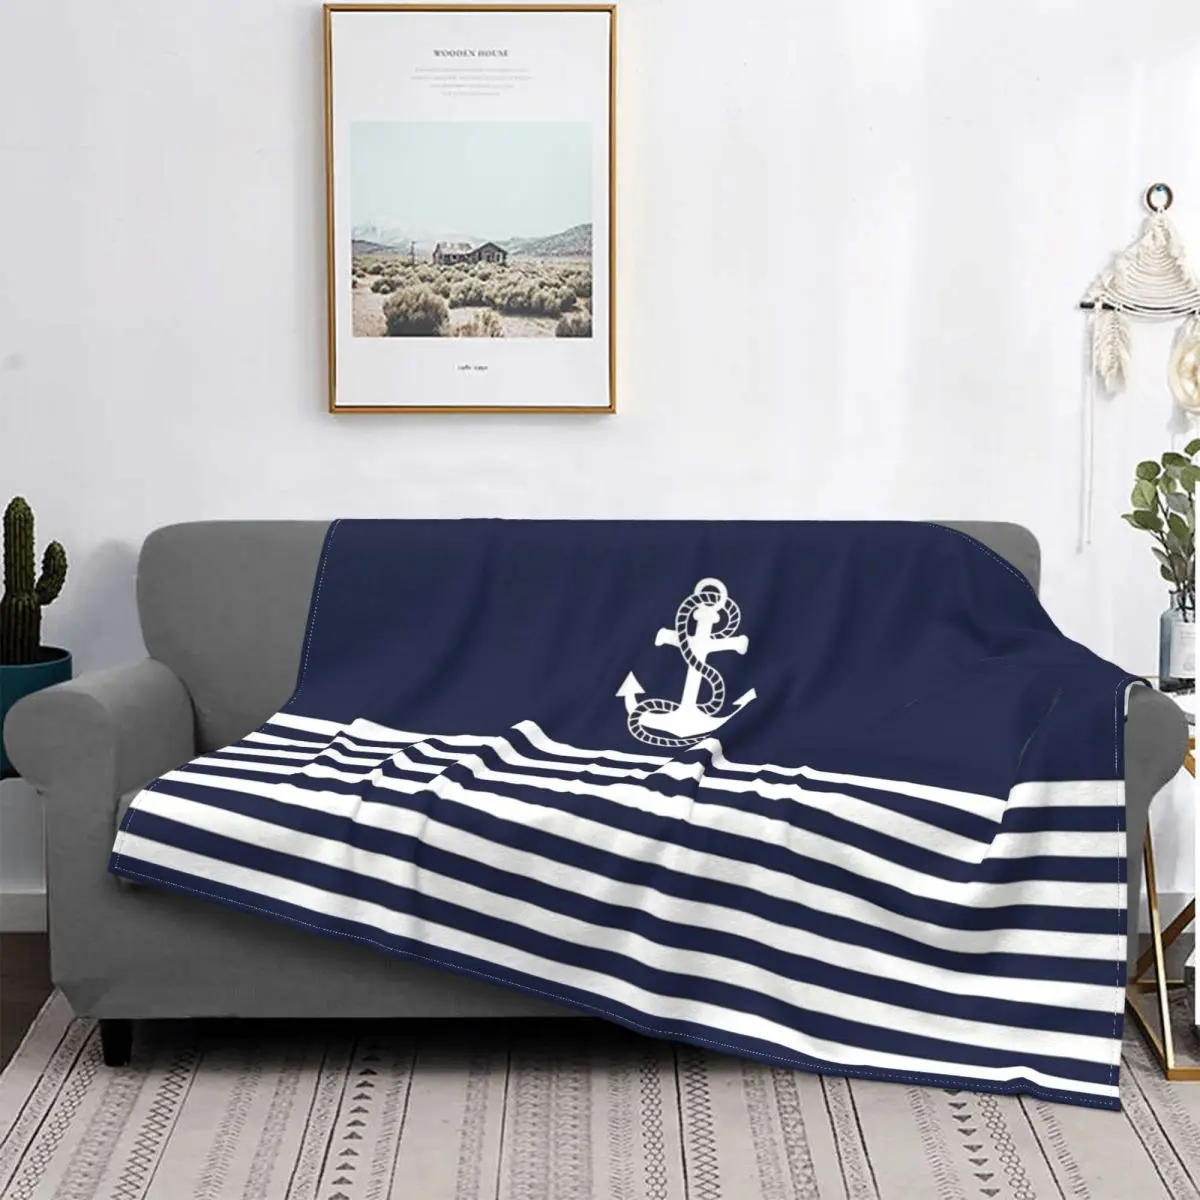 

Nautical Navy Blue Stripes And White Anchor Blankets Flannel Throw Blanket Airplane Travel Printed Soft Warm Bedspread